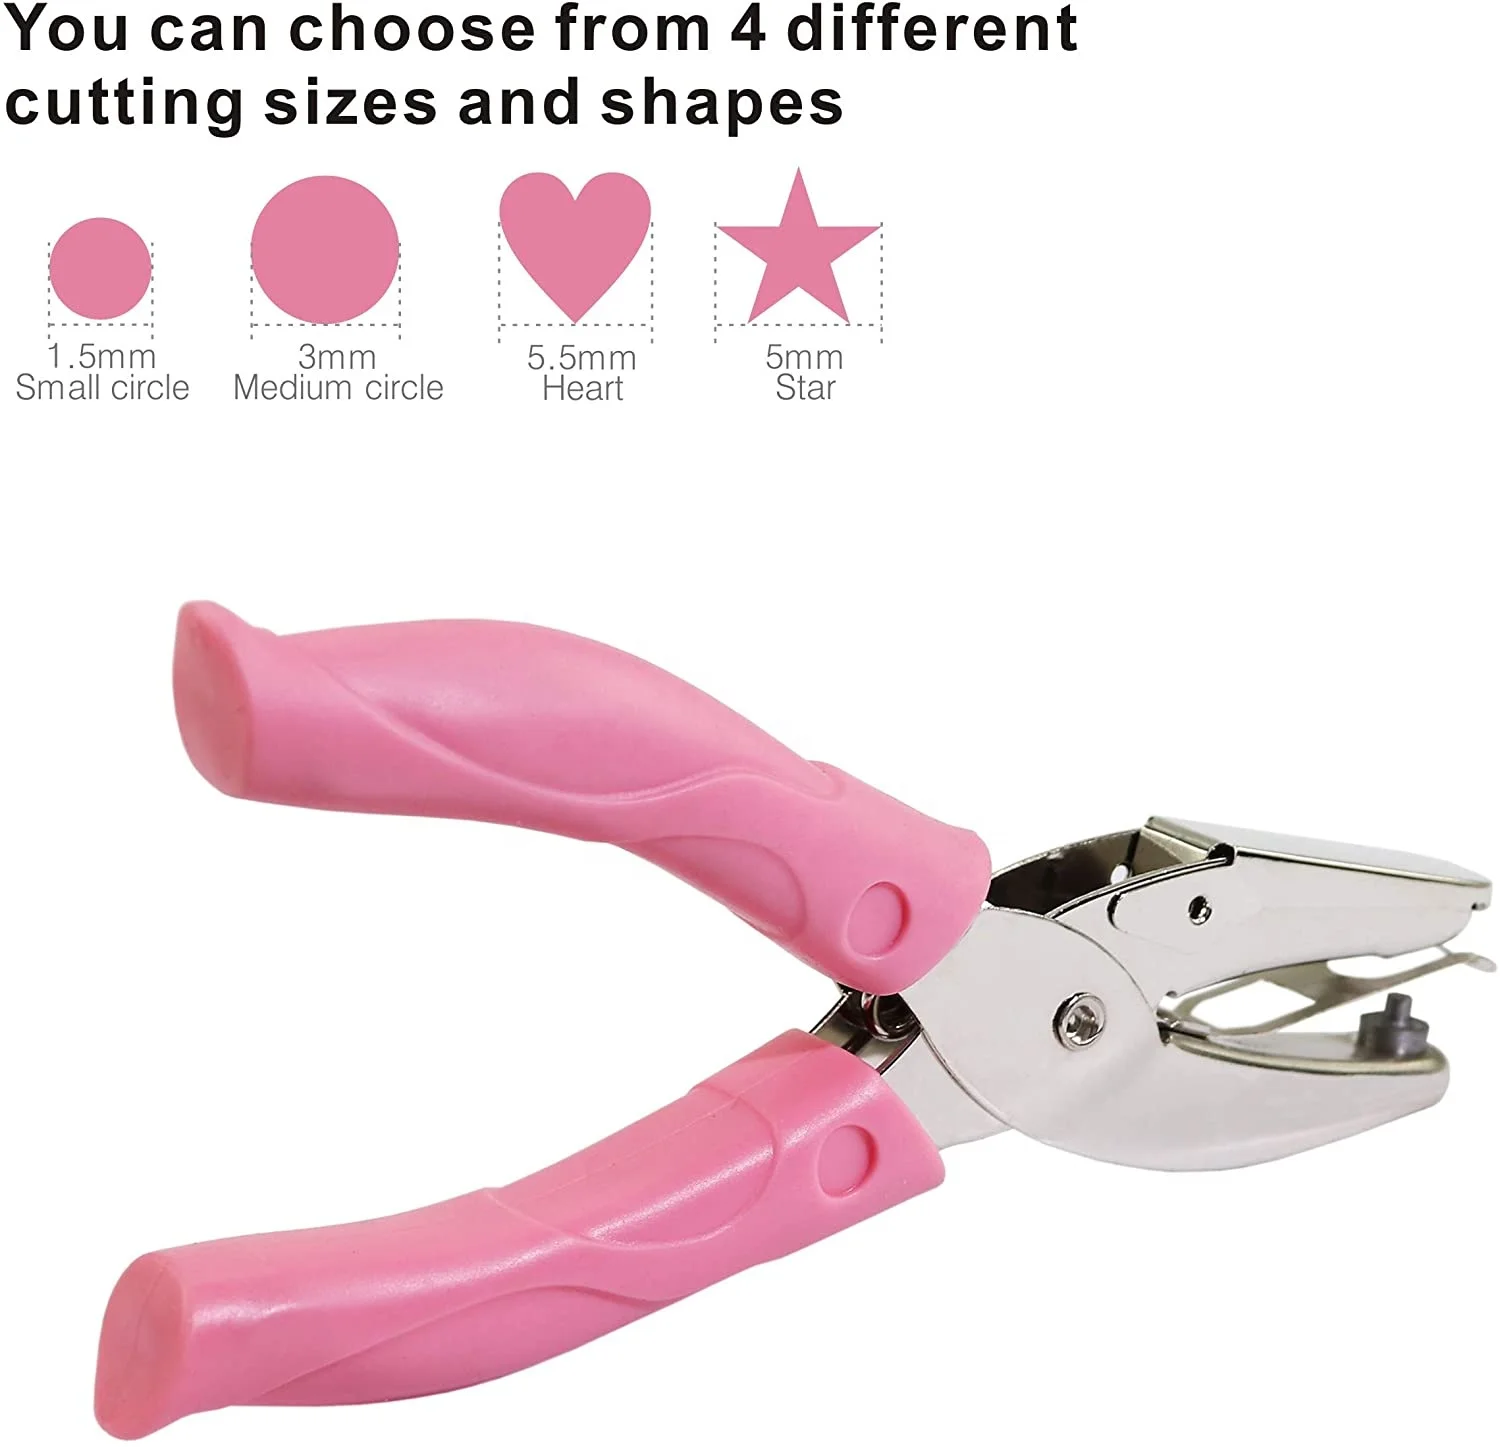 1/4 Inch Heart Shaped Metal Single Handheld Hole Paper Punch Punchers with Soft-Handled for Tags Clothing Ticket